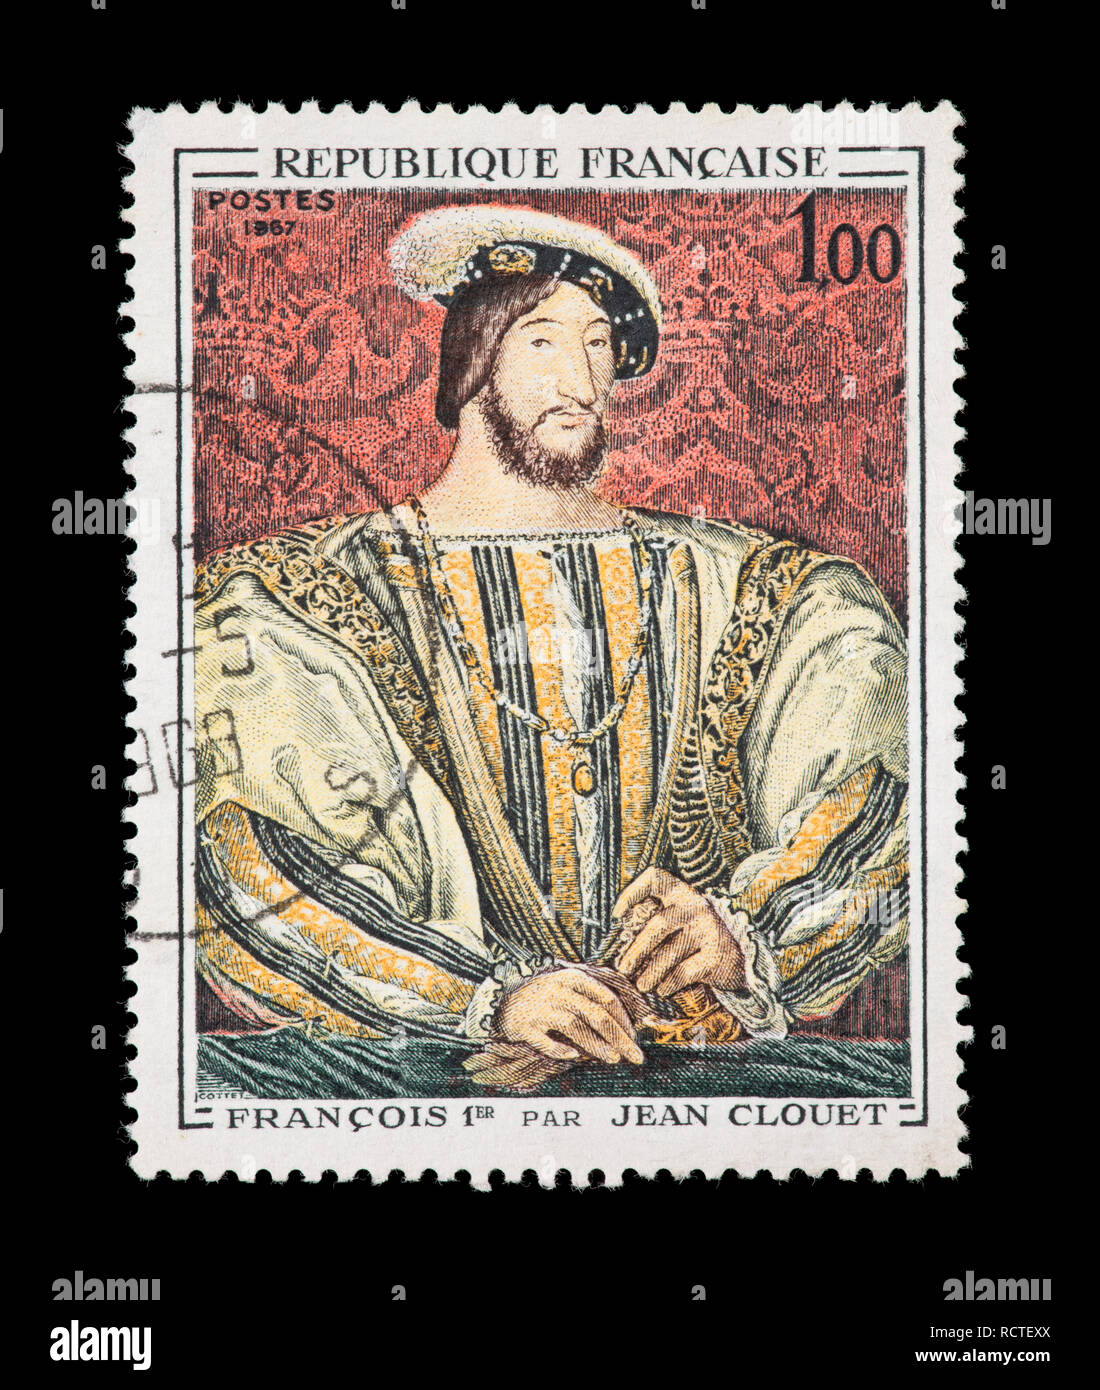 Postage stamp from France depicting the Jean Clouet painting 'Francois I' Stock Photo